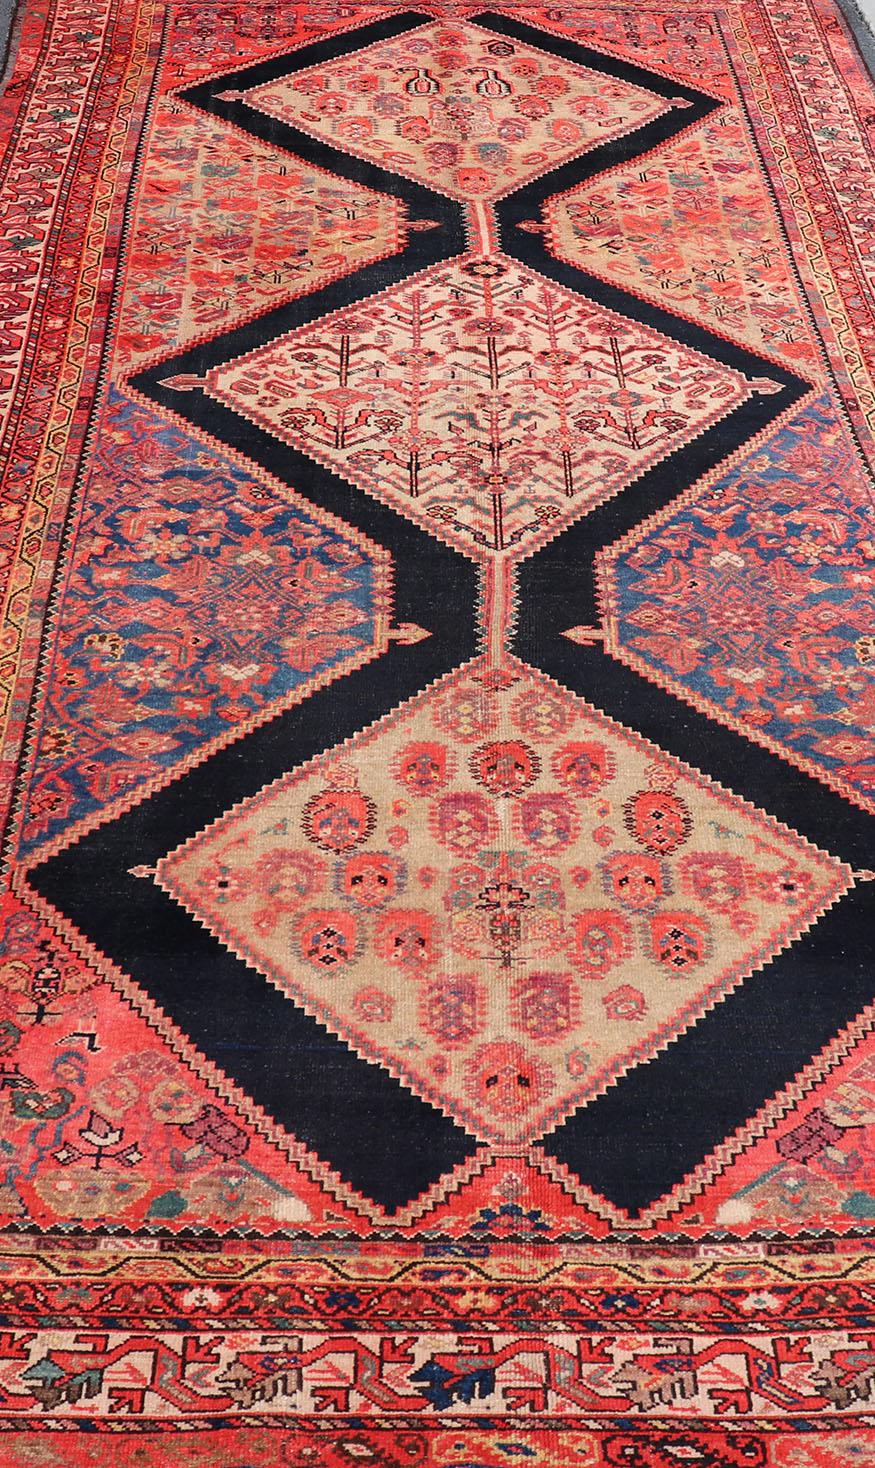 This Multicolored Antique Persian Malayer wide gallery runner features a geometric medallion design replete with Sub-geometric motifs. The entirety of the piece is enclosed within a complementary multi-tiered border. 

Antique Persian Malayer